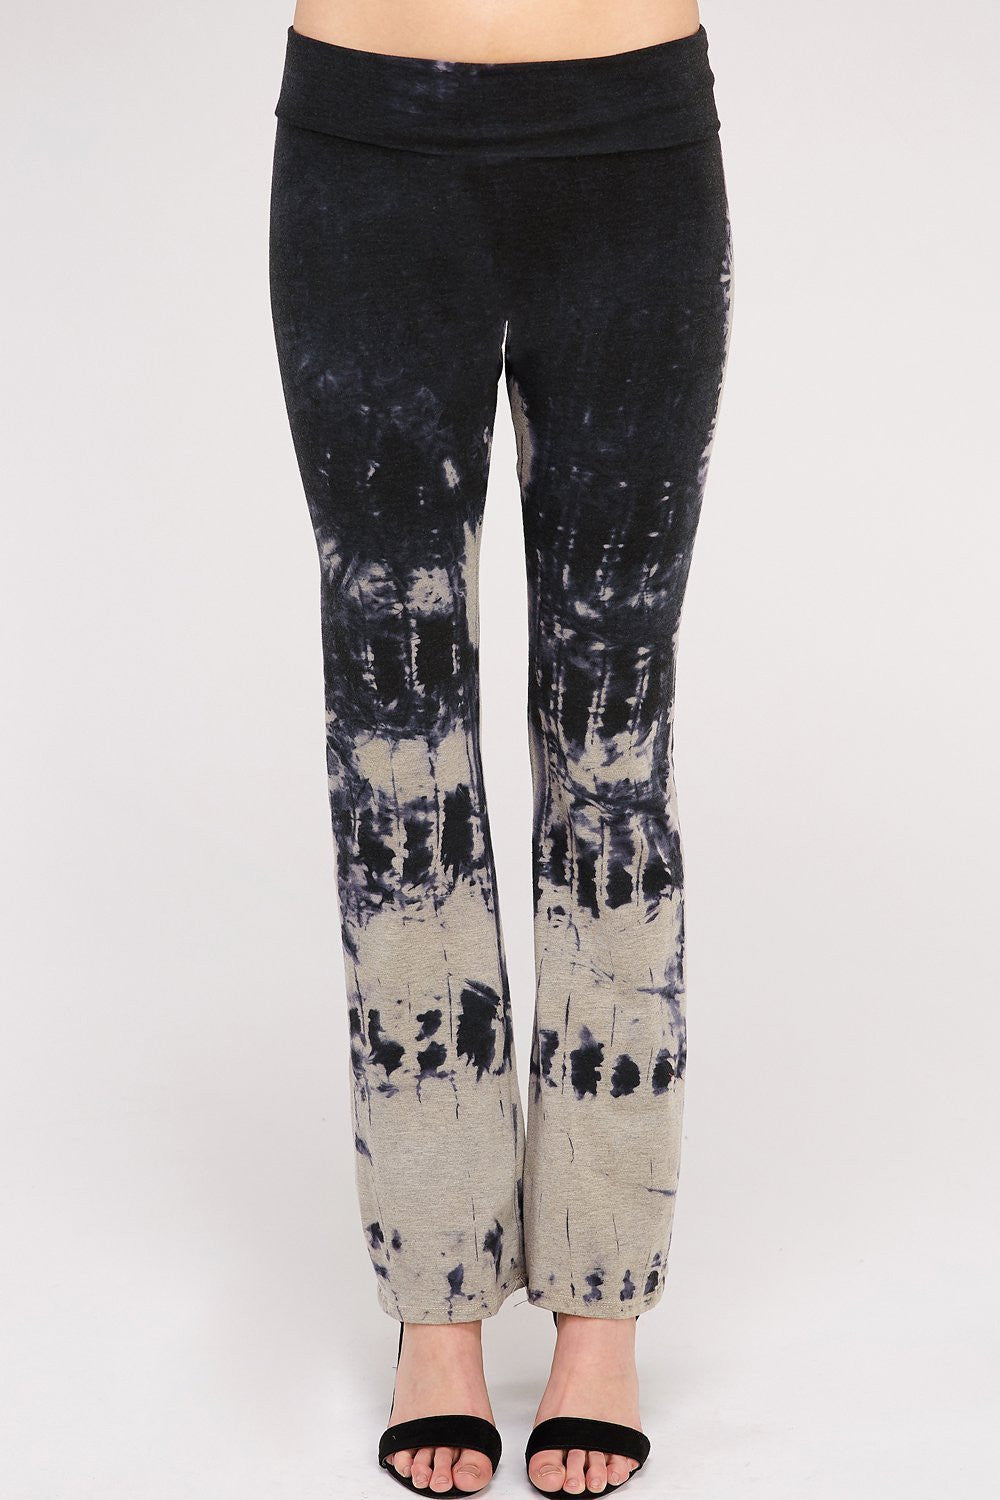 Front side Black and Grey Discharge Tie-dye Straight Leg Yoga pant